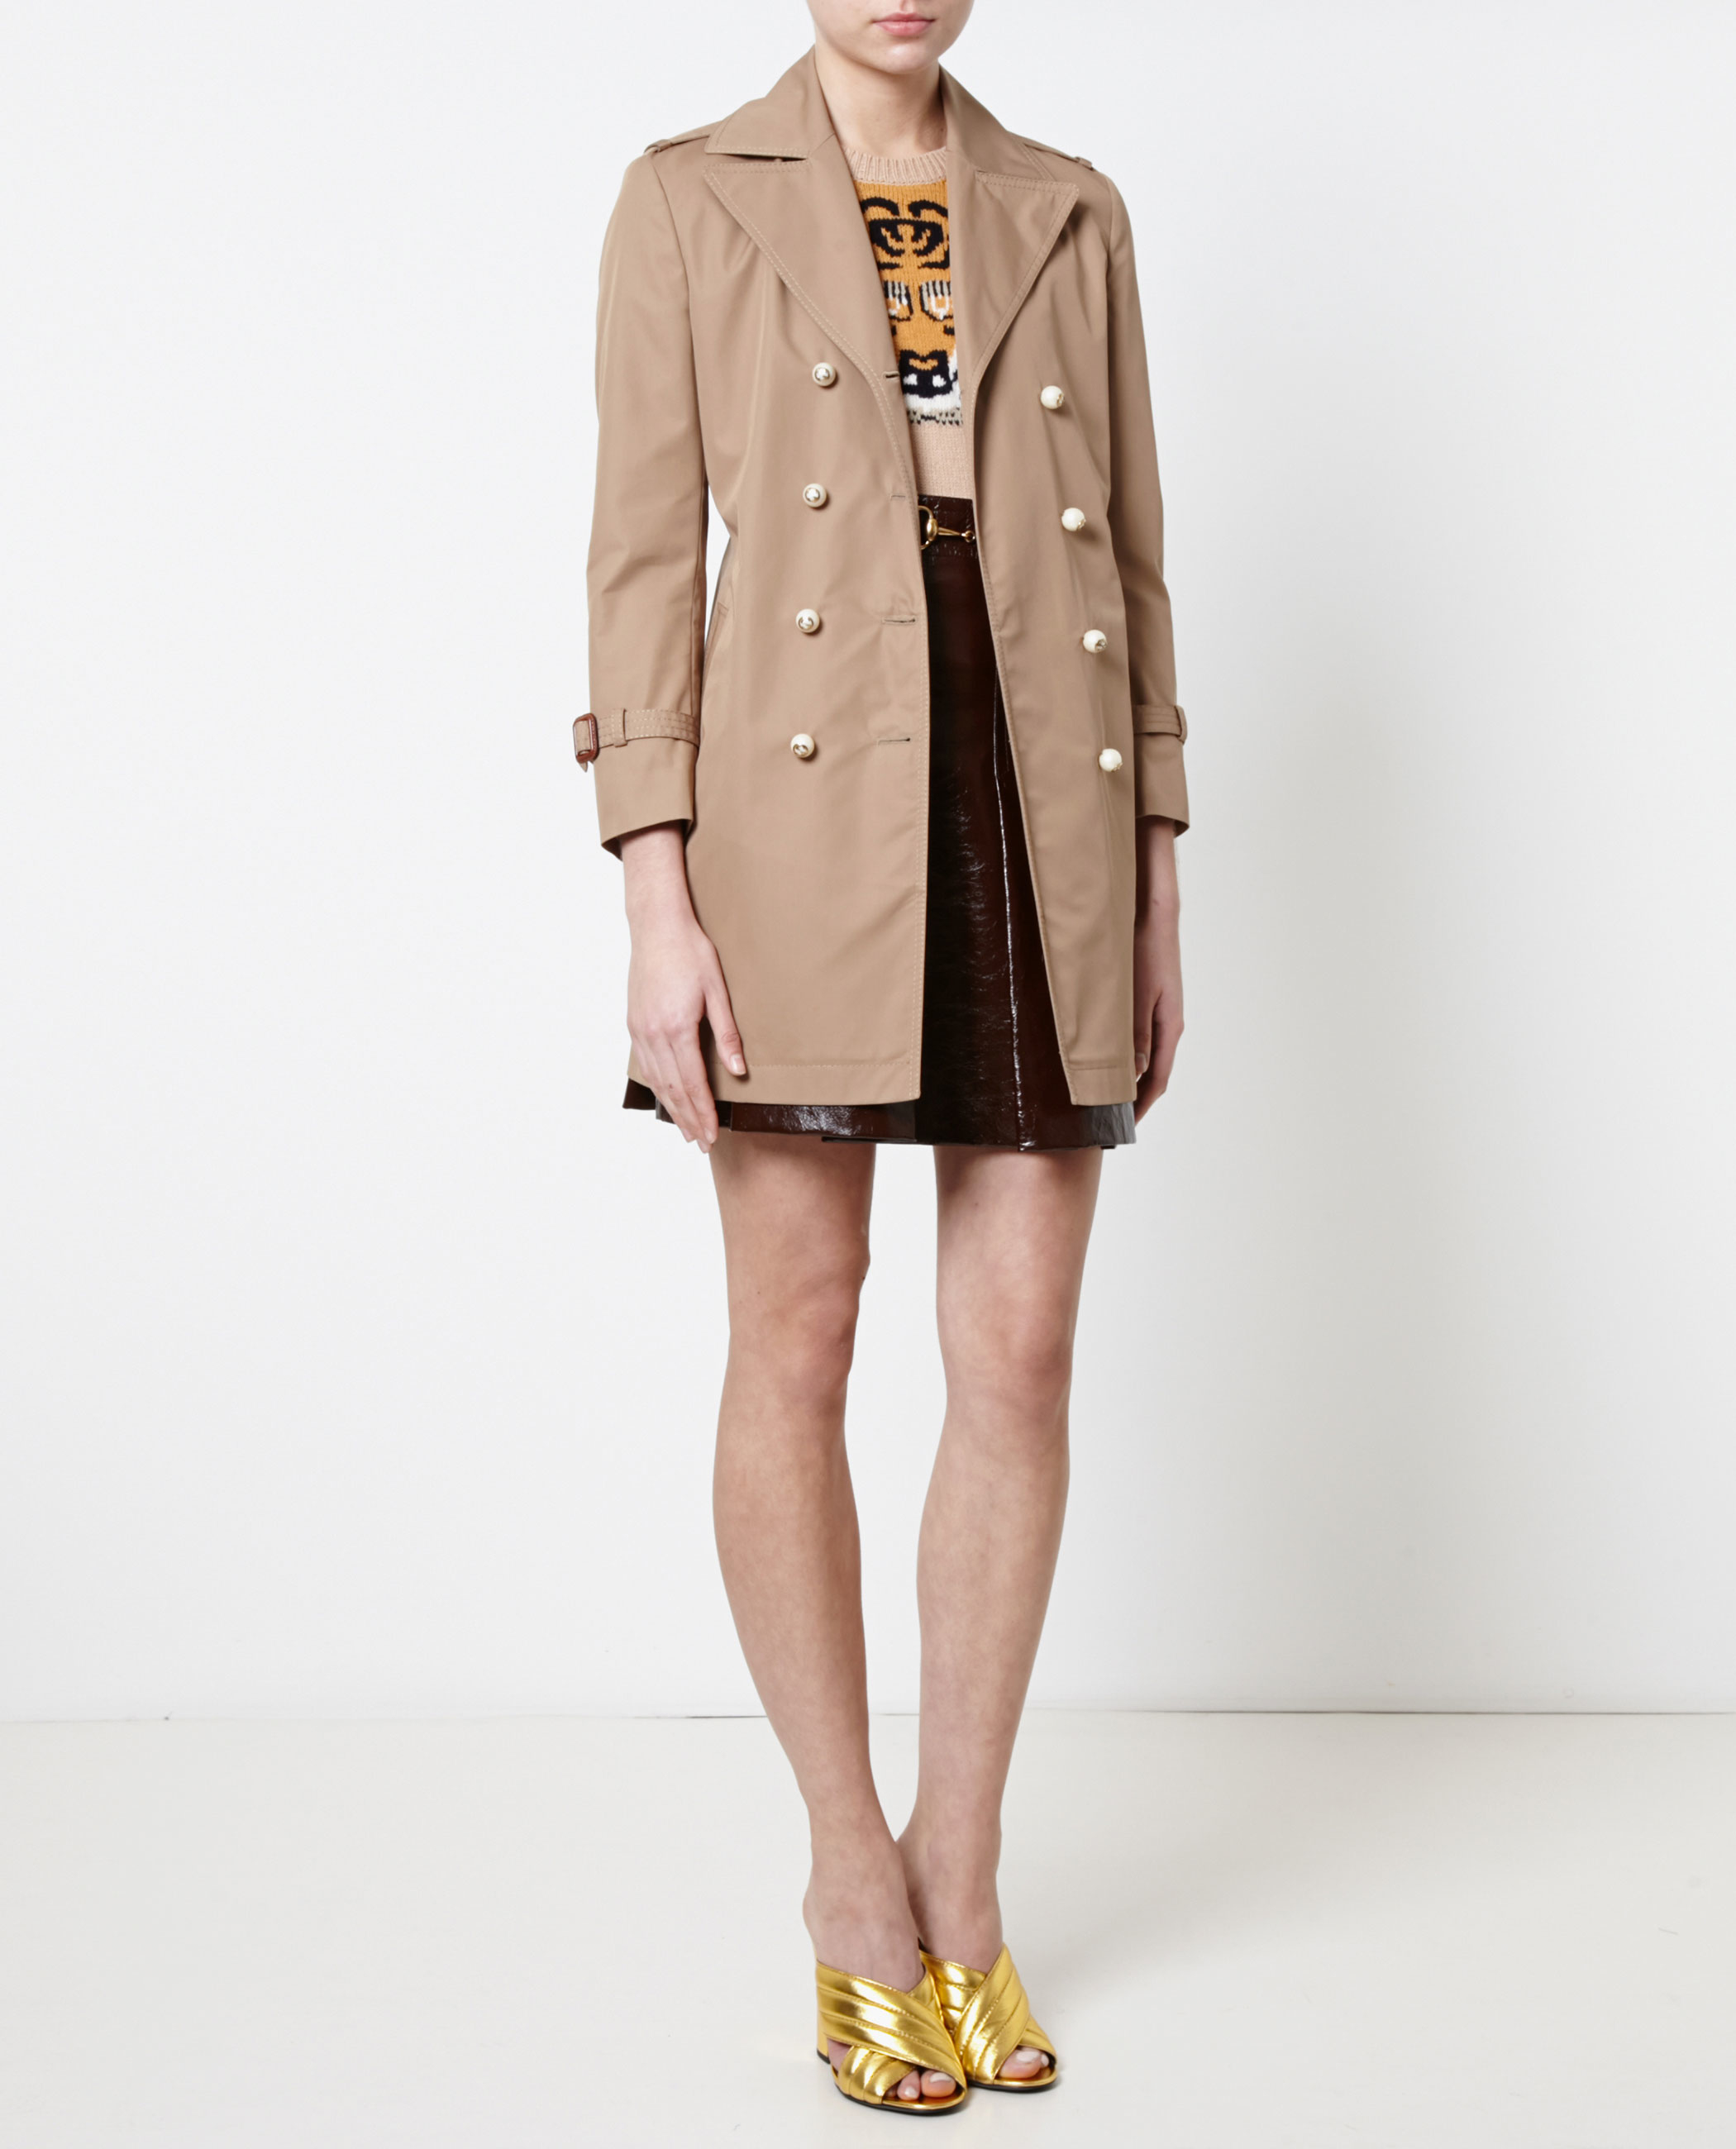 Gucci Trench Coat With Pearl Buttons in Beige (Natural) - Lyst